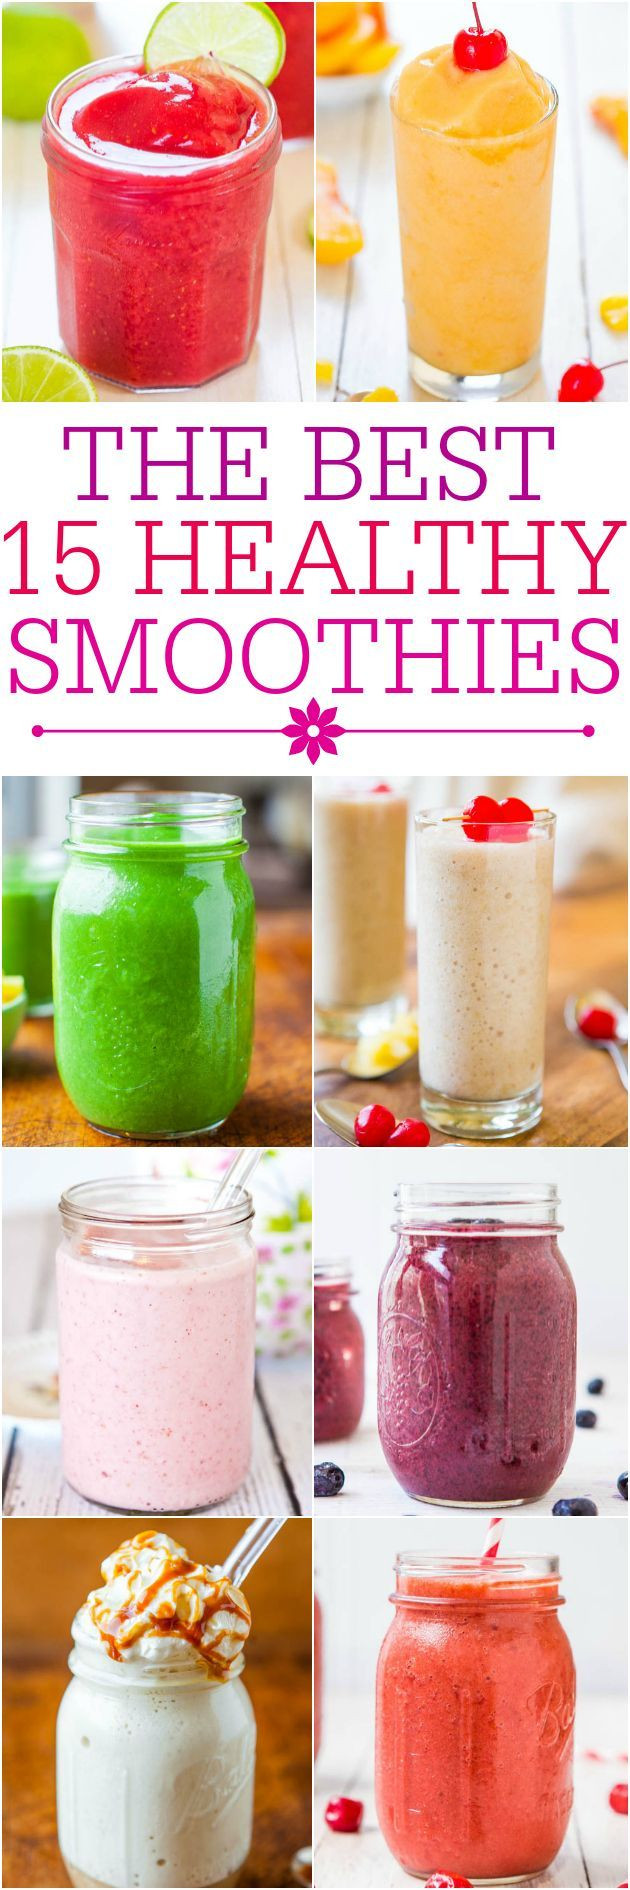 Magic Bullet Recipes For Weight Loss
 17 Best ideas about Magic Bullet Smoothies on Pinterest